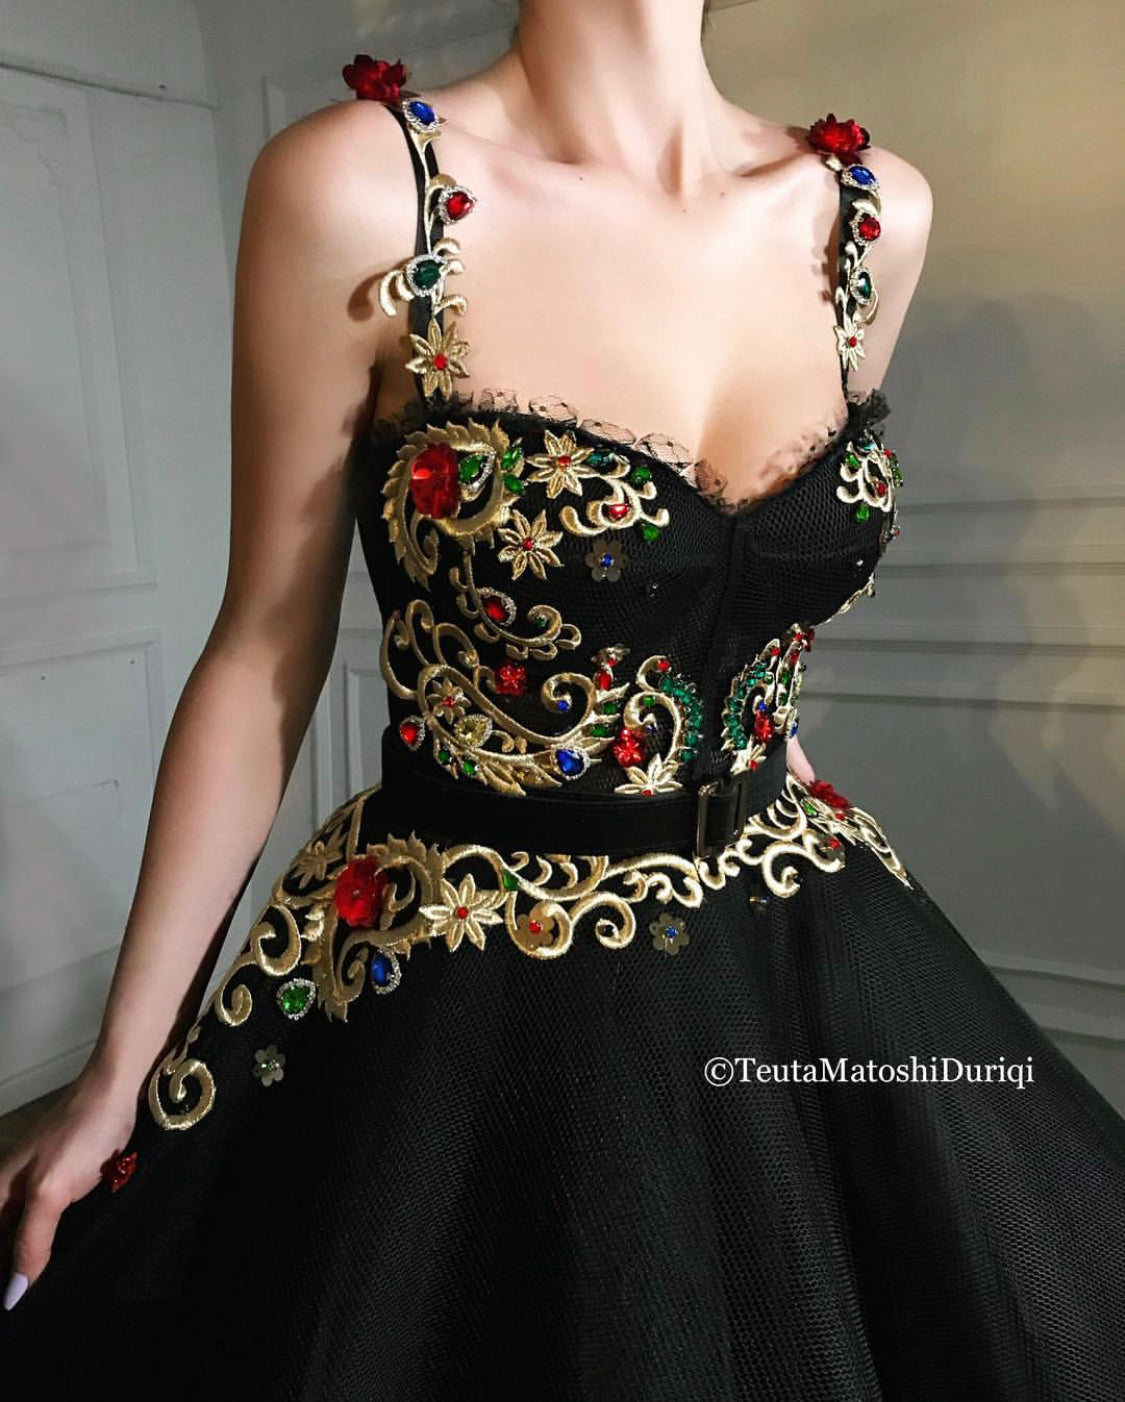 Black A-Line dress with spaghetti straps and embroidery